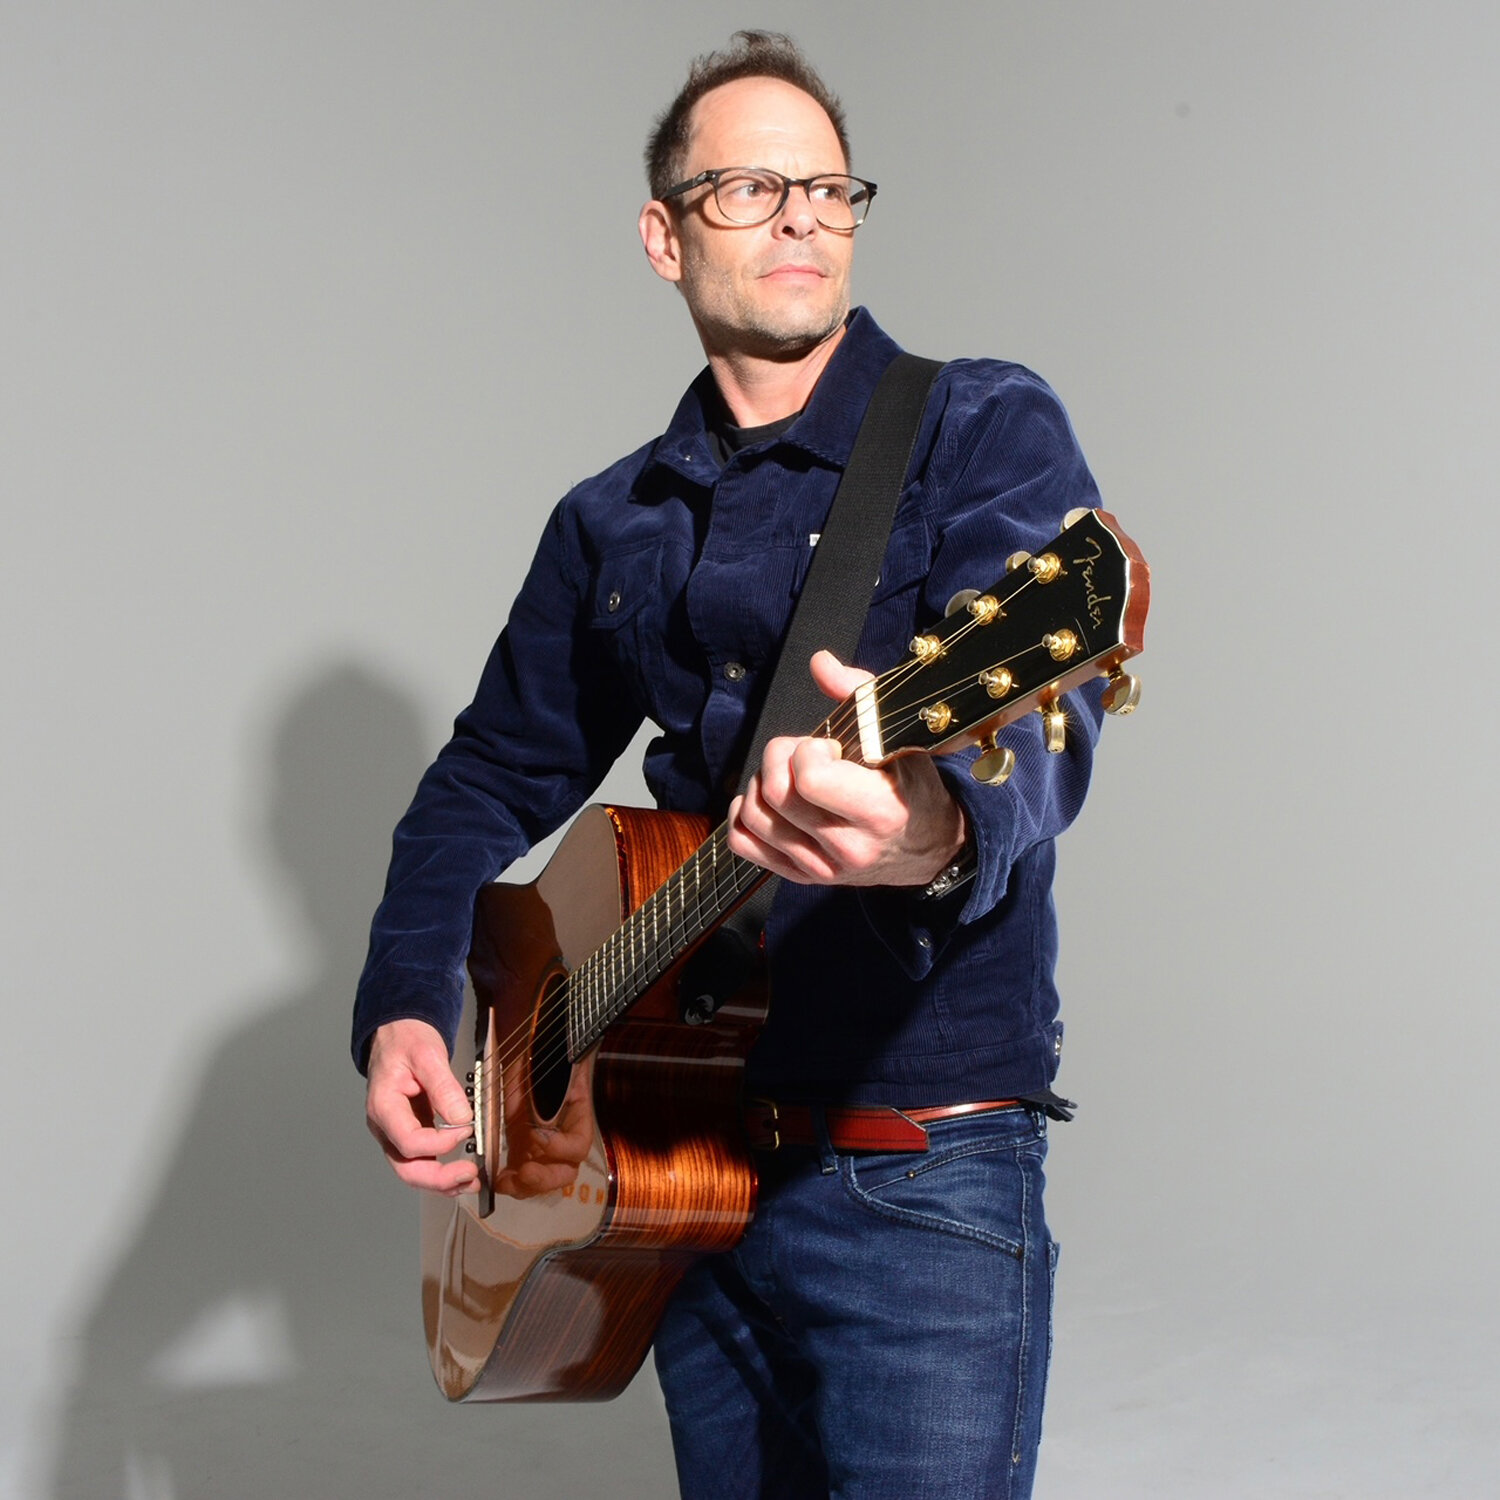 Robin Wilson, frontman of the alternative rock/power pop band Gin Blossoms, has settled comfortably into his life on Long Island.